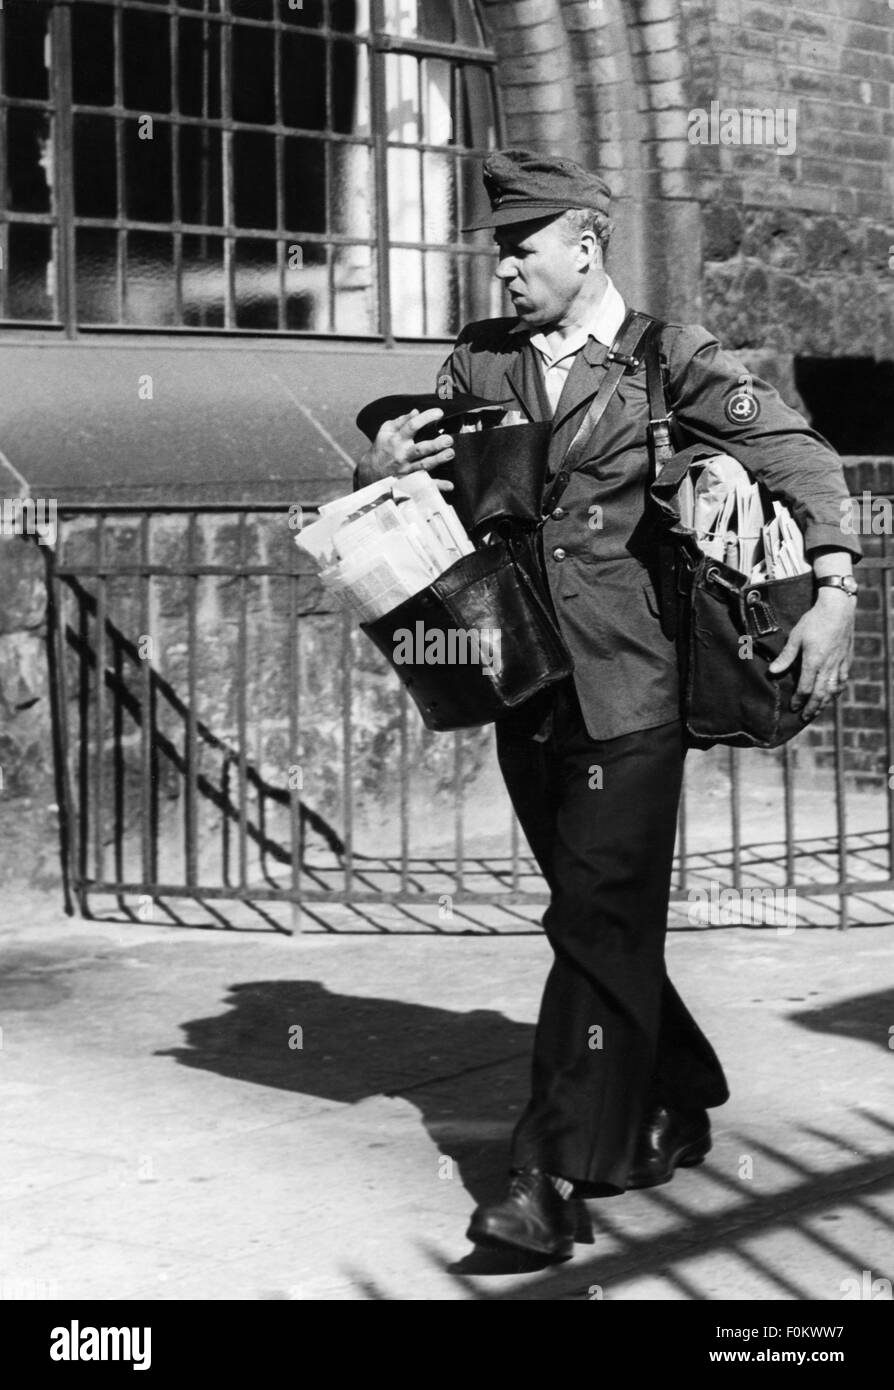 people, professions, postman, postman carrying many bags, 1950s, Additional-Rights-Clearences-Not Available Stock Photo